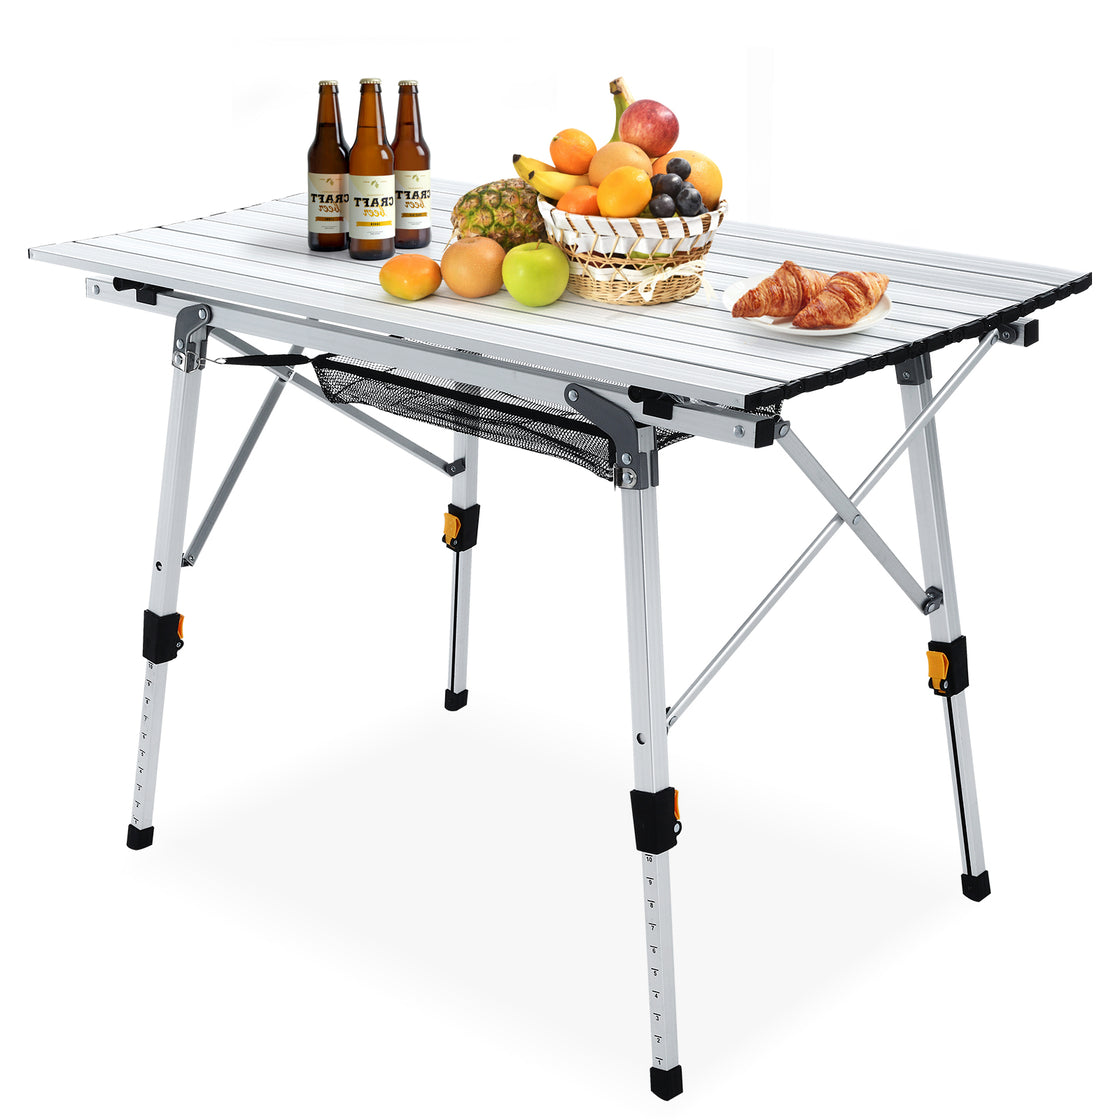 Brace Master Camping Table Folding Portable Aluminum Picnic Table with Tablecloth